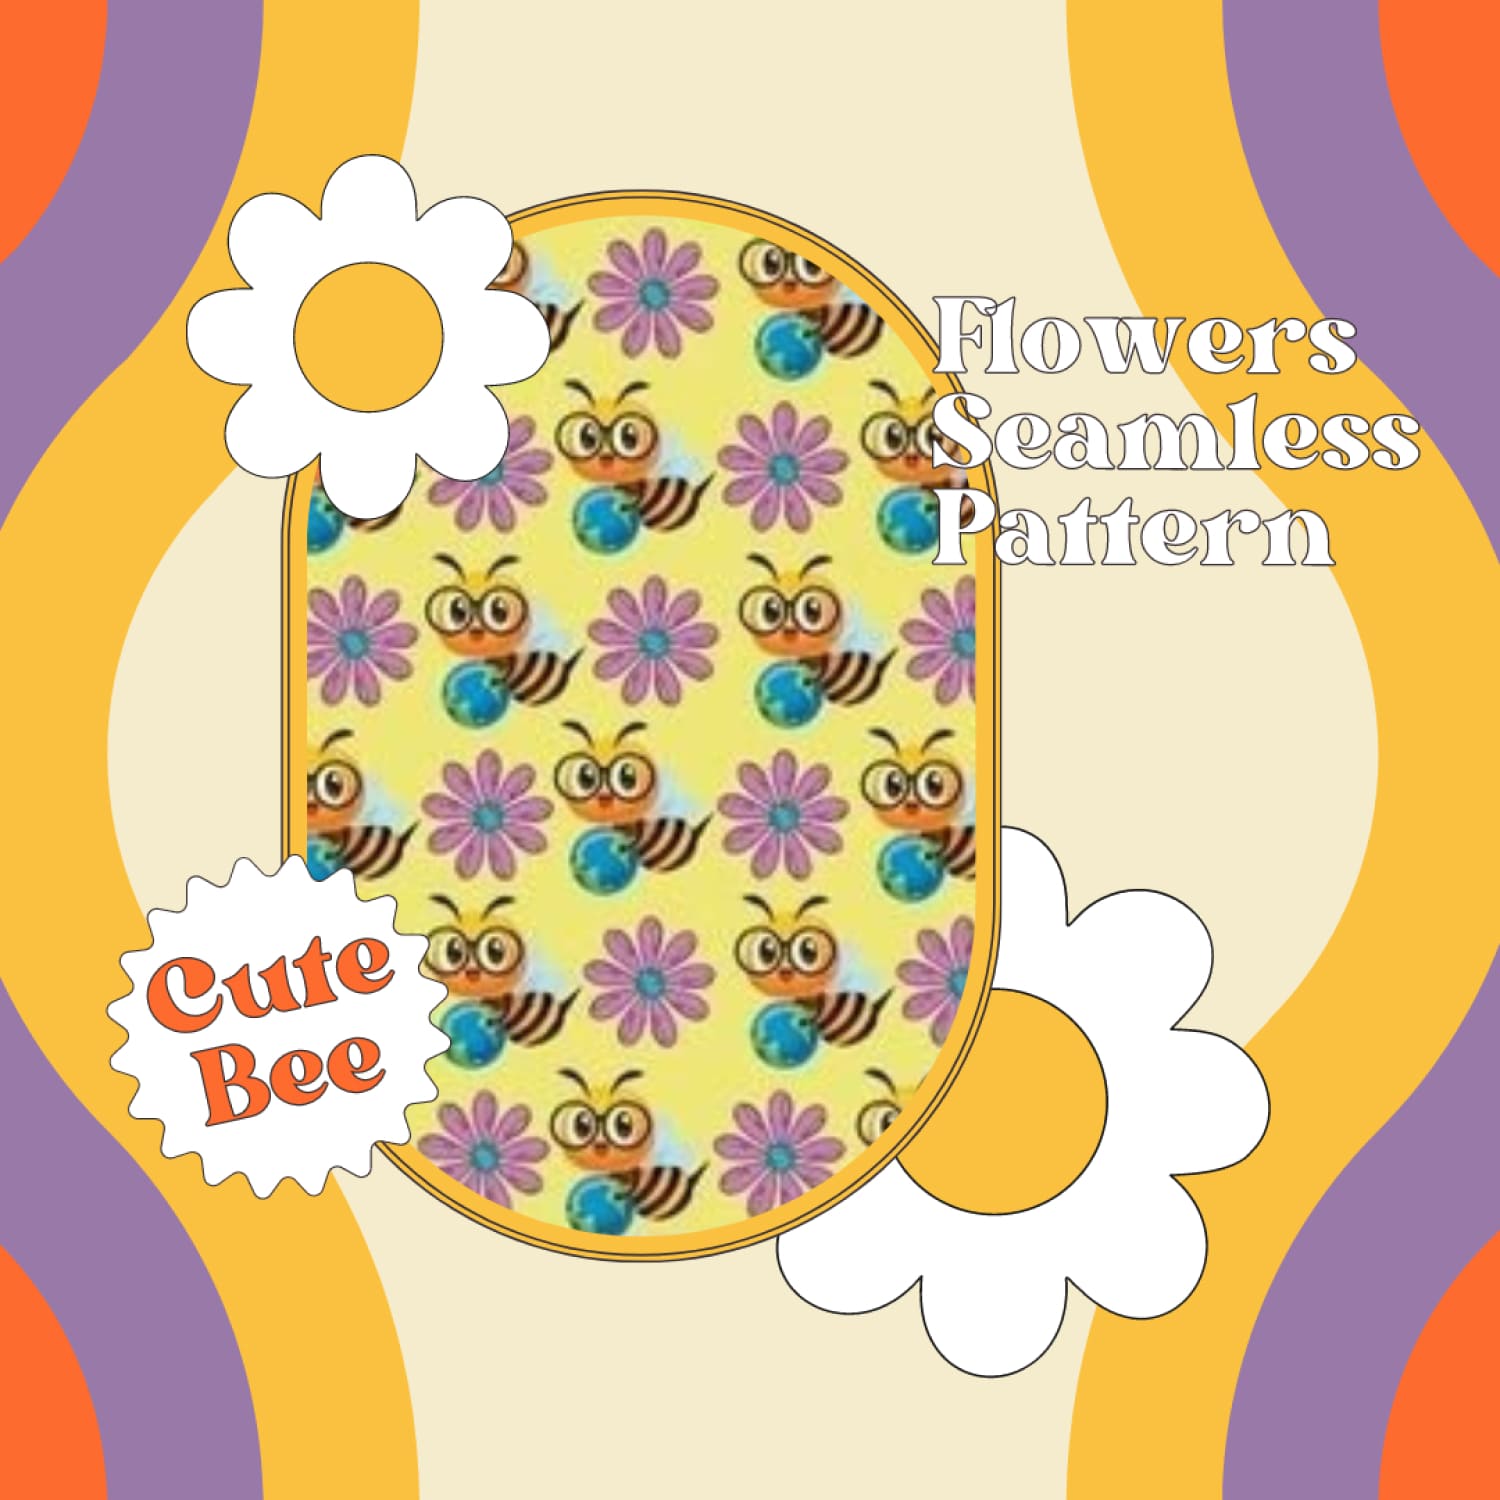 Cute Bee With Flowers Seamless Pattern.